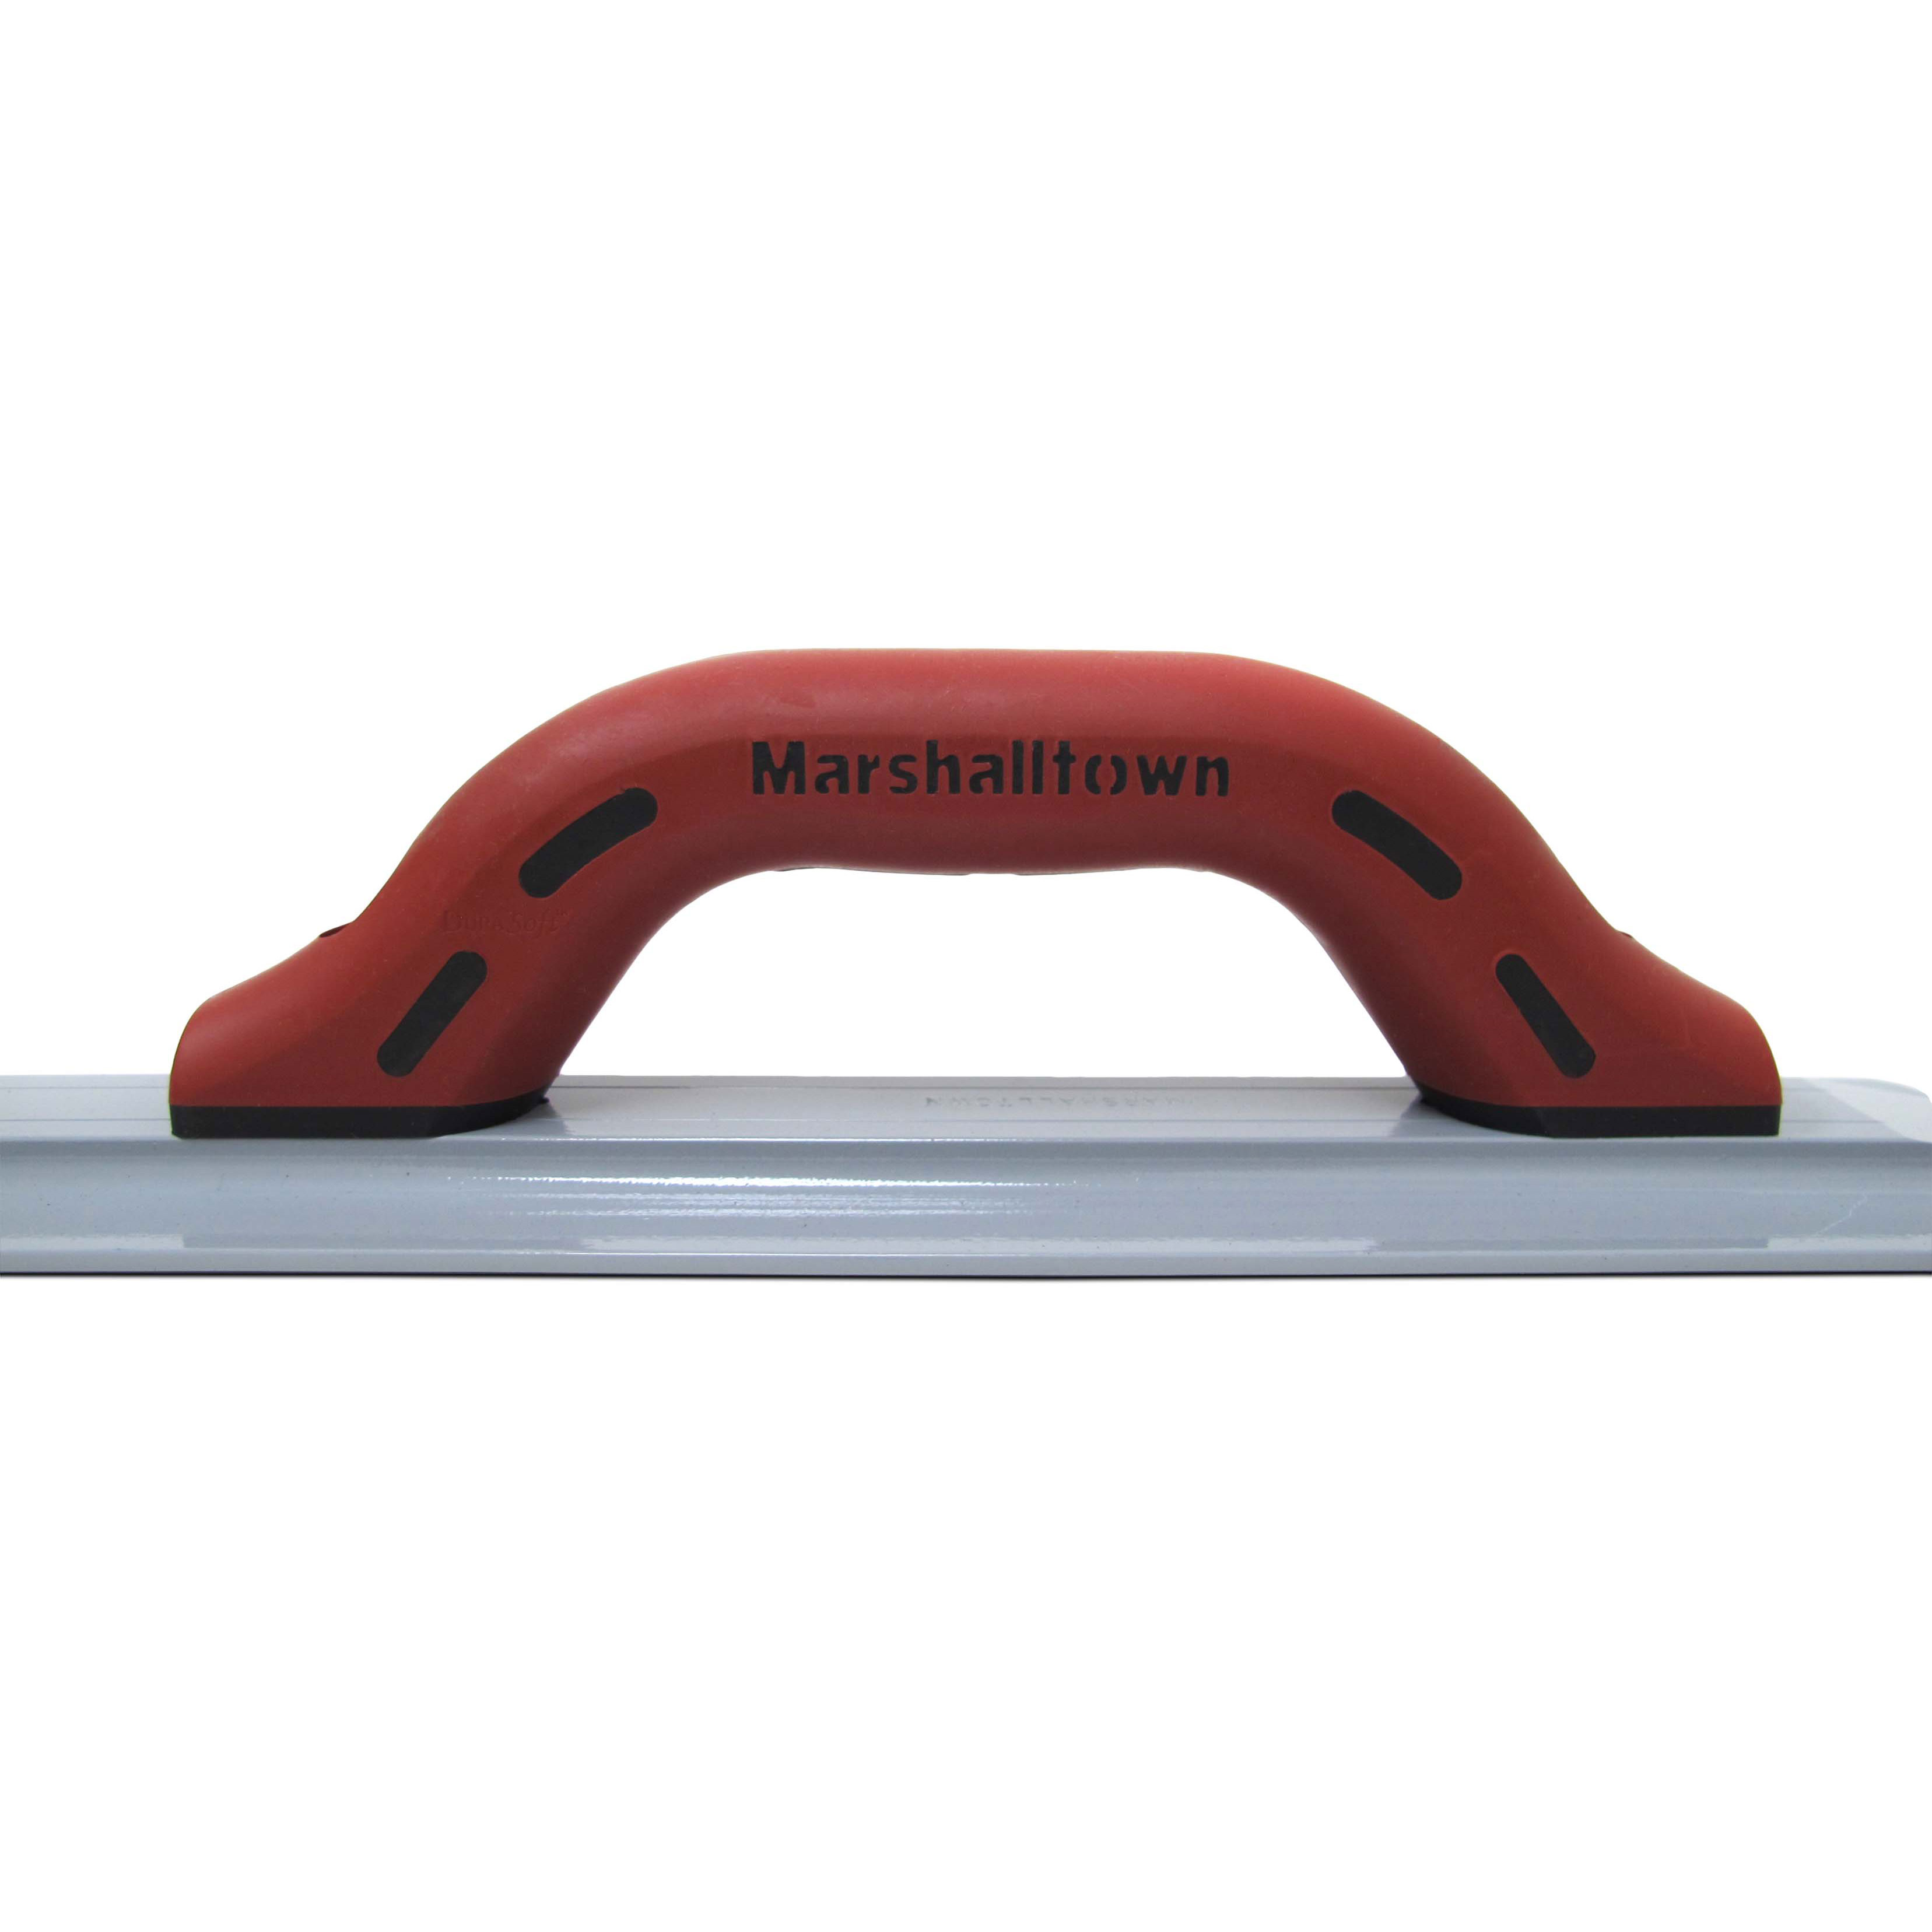 Marshalltown 145D 16in. x 3-1/8in. Magnesium Float with DuraSoft Handlee MAT-145D